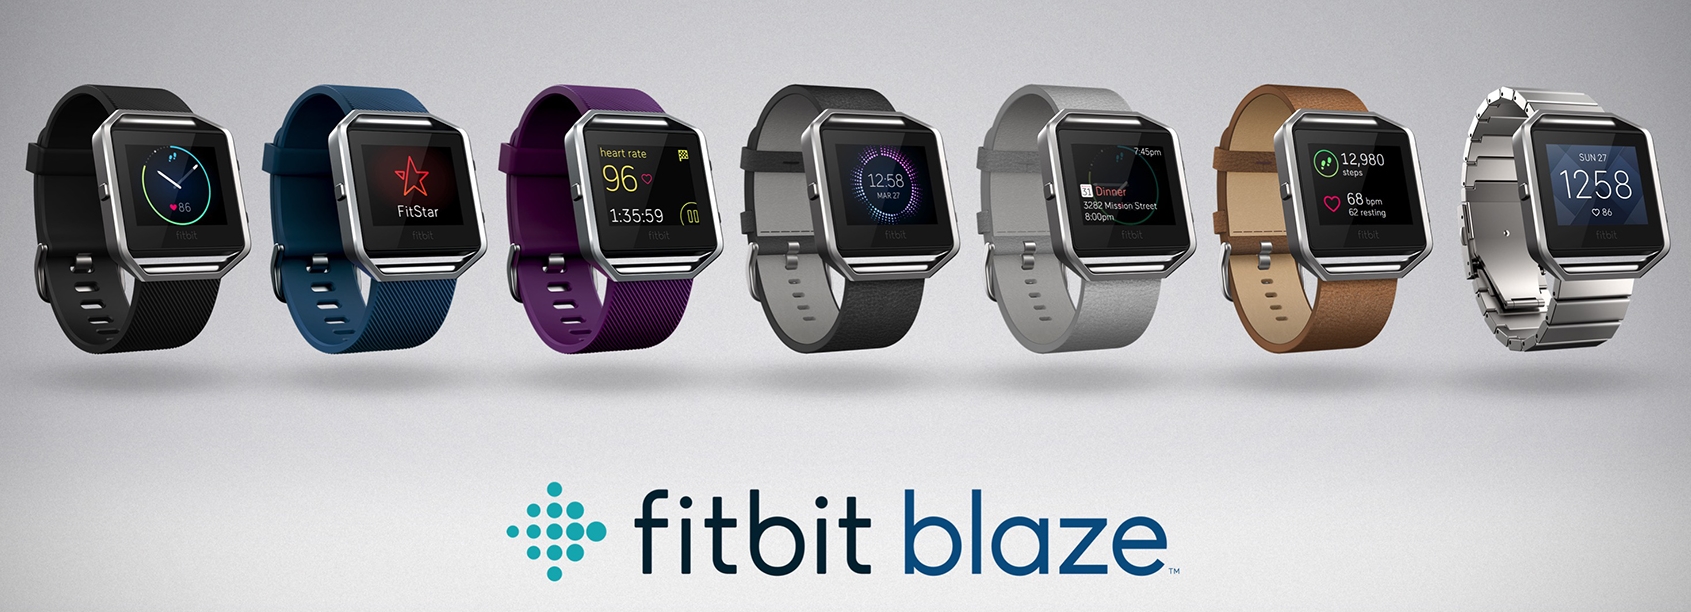 Fitbit Blazes Up with Smartwatch Launch